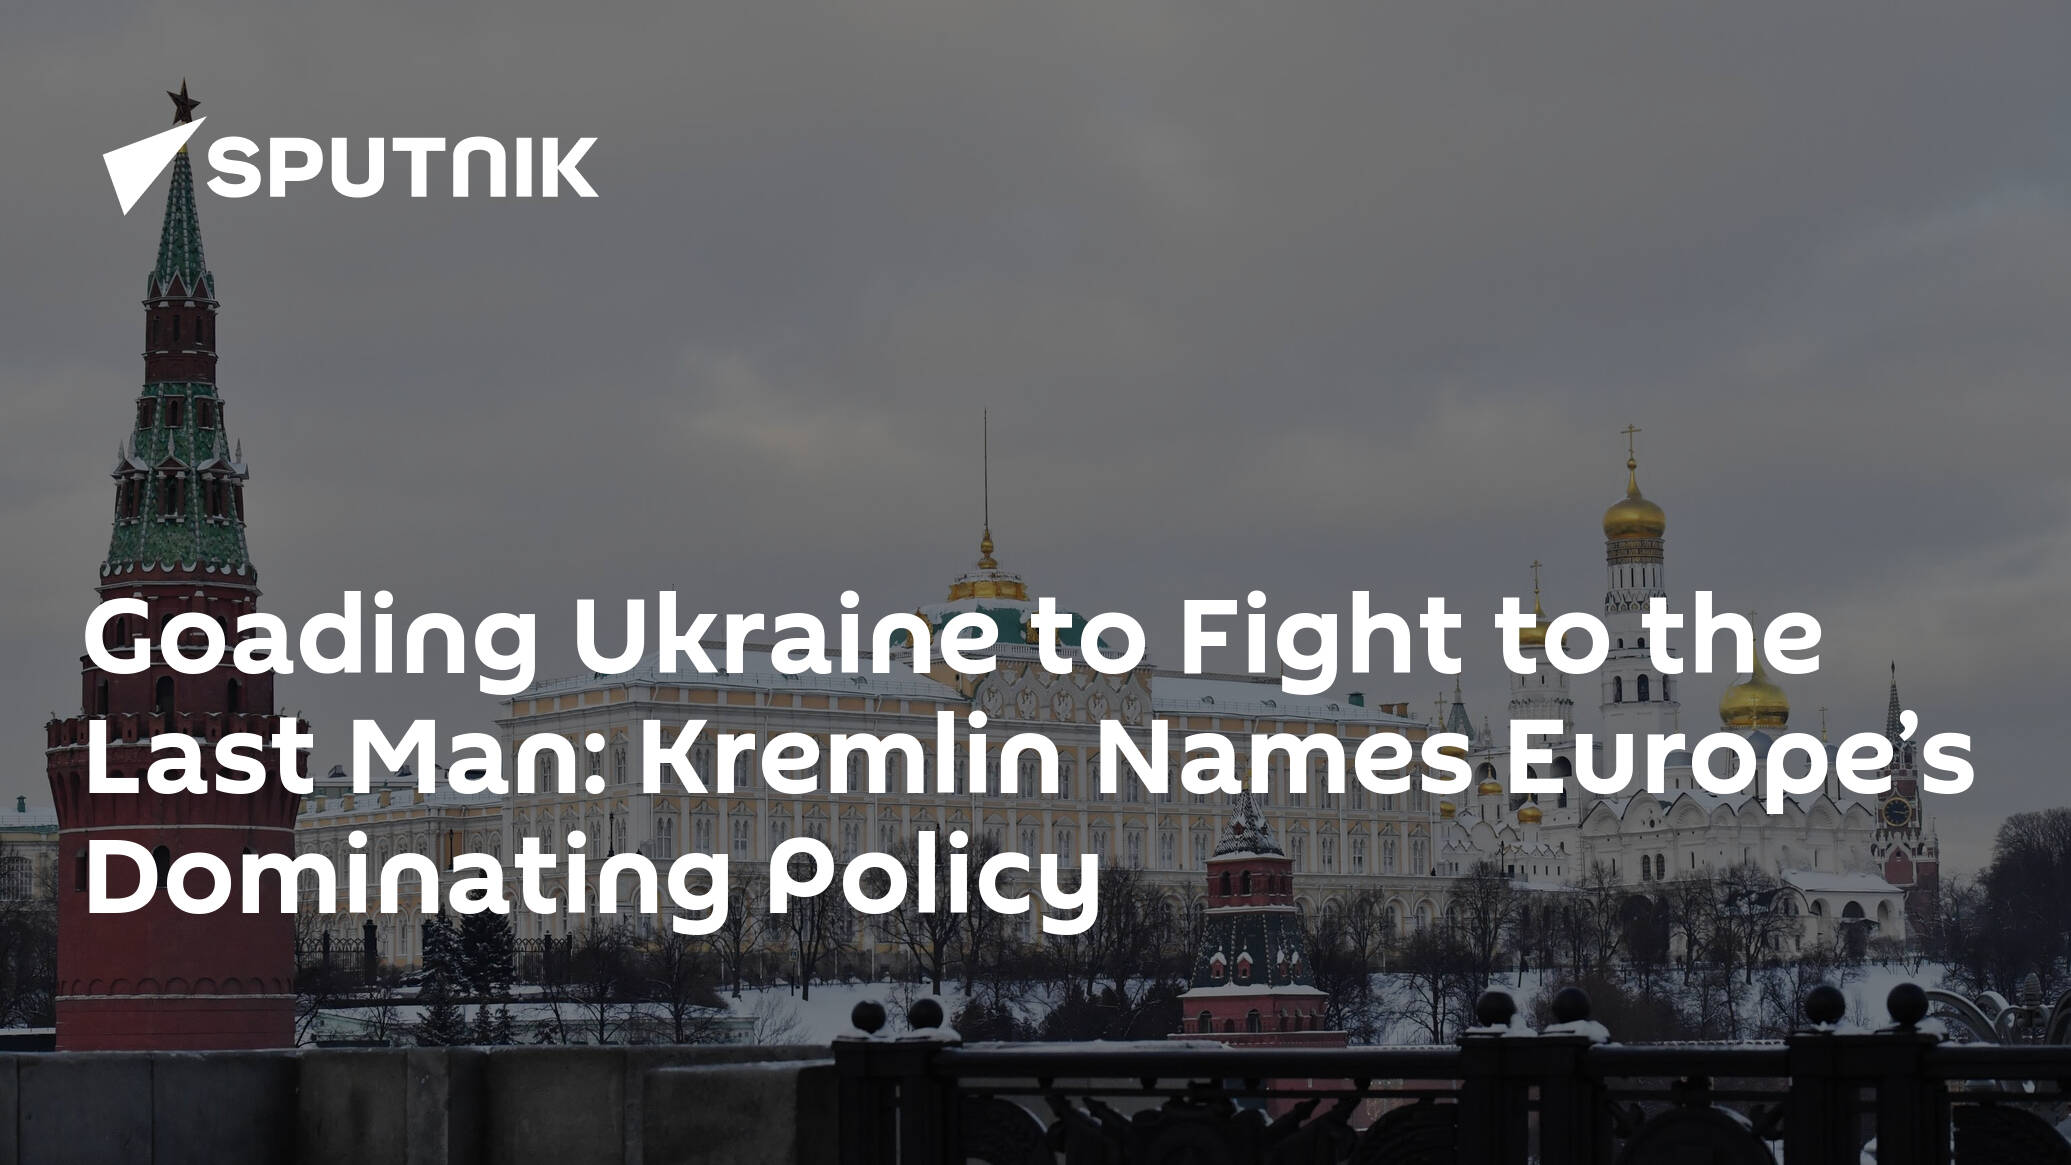 Goading Ukraine to Fight to the Last Man: Kremlin Names Europe’s Dominating Policy